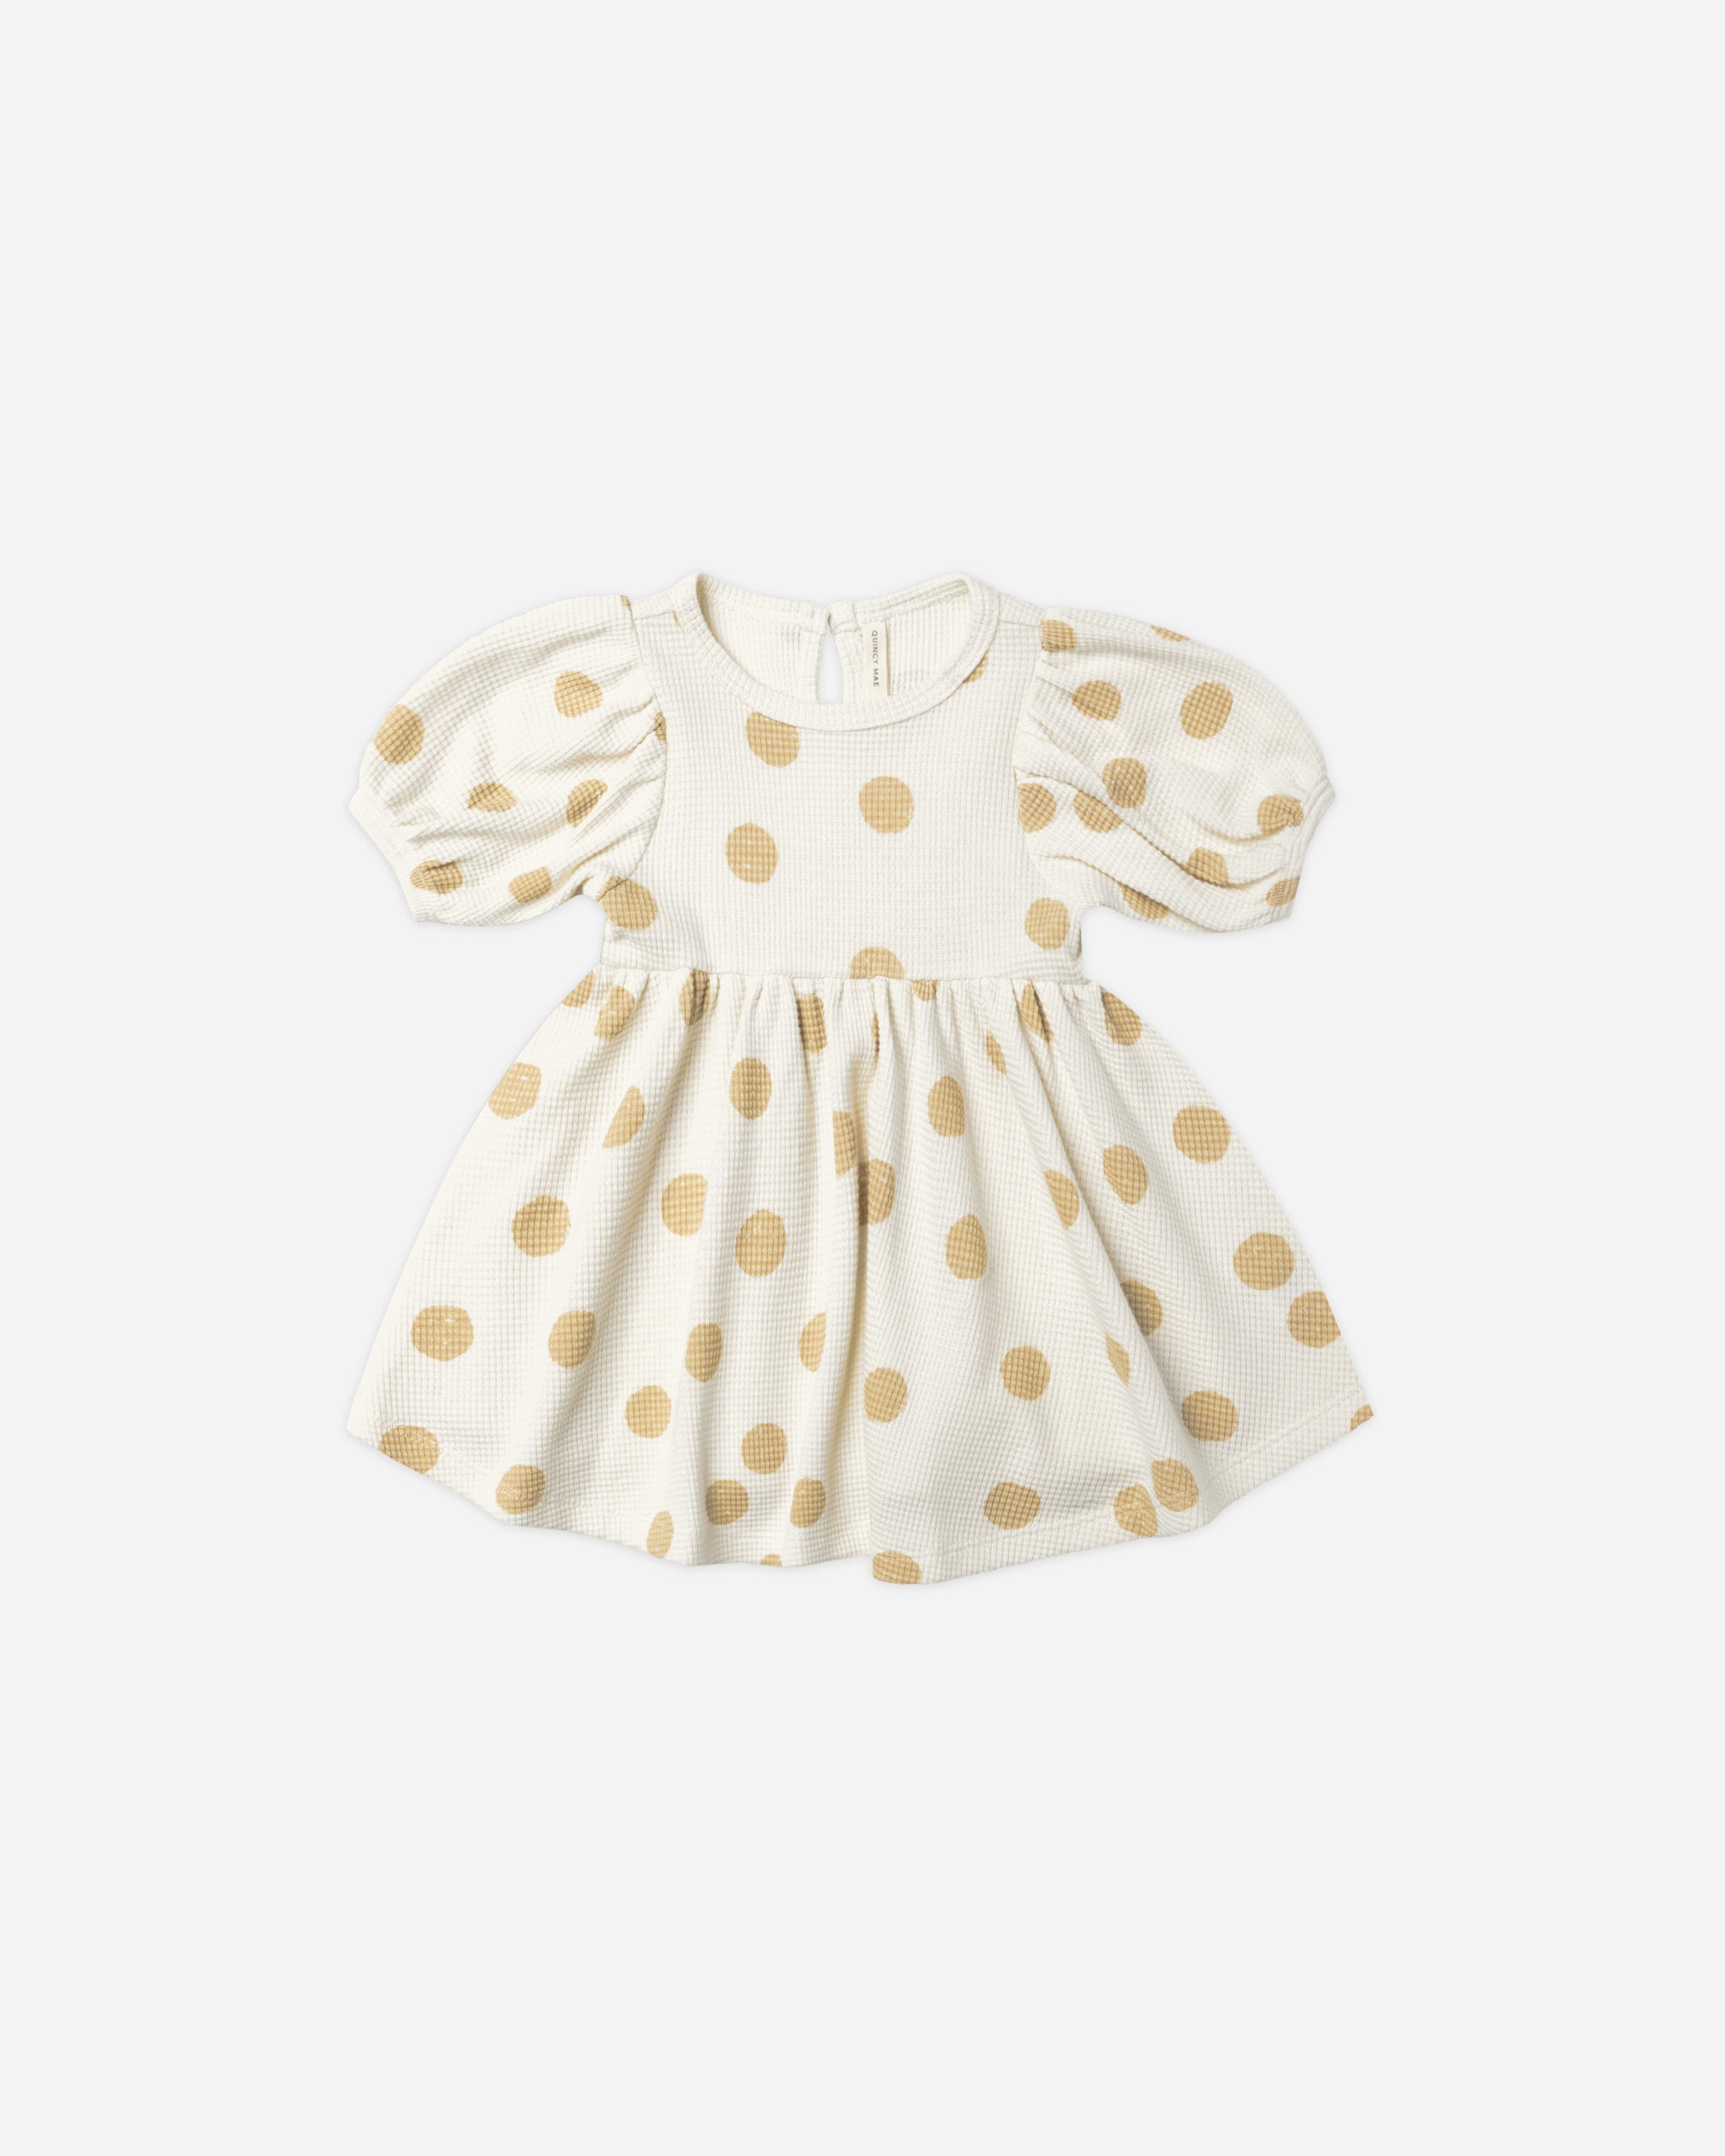 Waffle Babydoll Dress || Butter Dots - Rylee + Cru | Kids Clothes | Trendy Baby Clothes | Modern Infant Outfits |